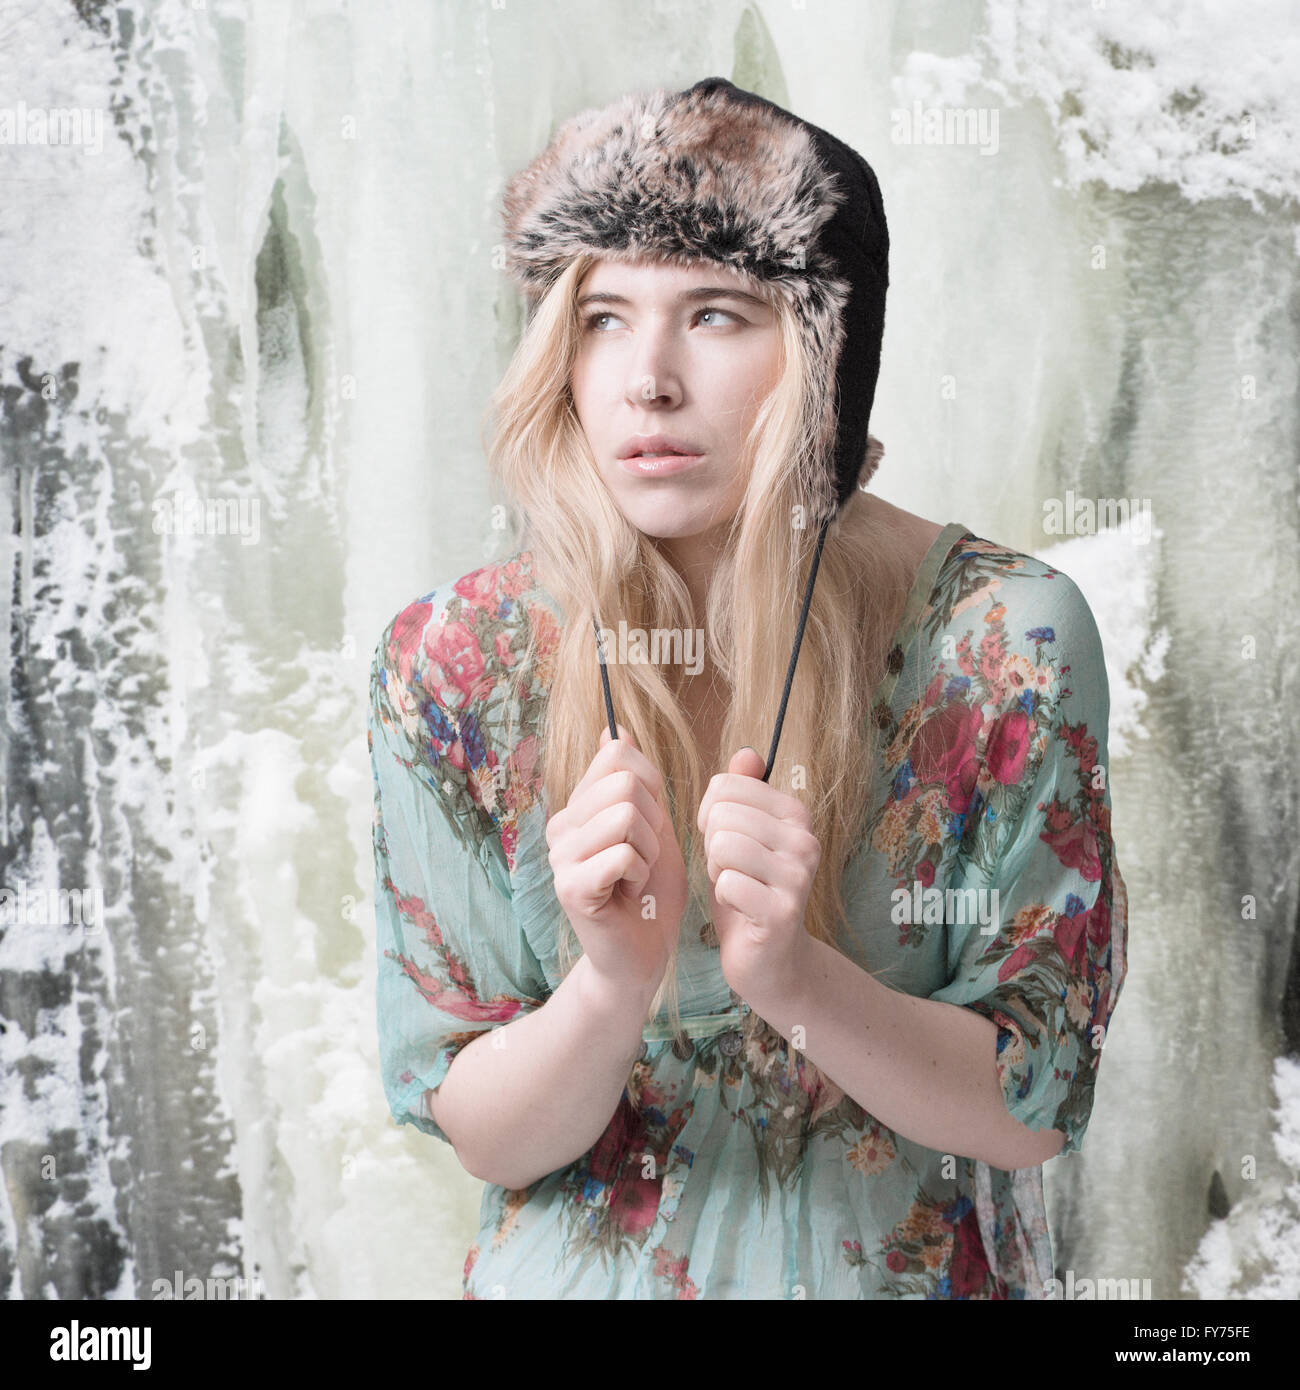 Blond woman summer dress and winter hat, in front of an ice-covered mountain Stock Photo